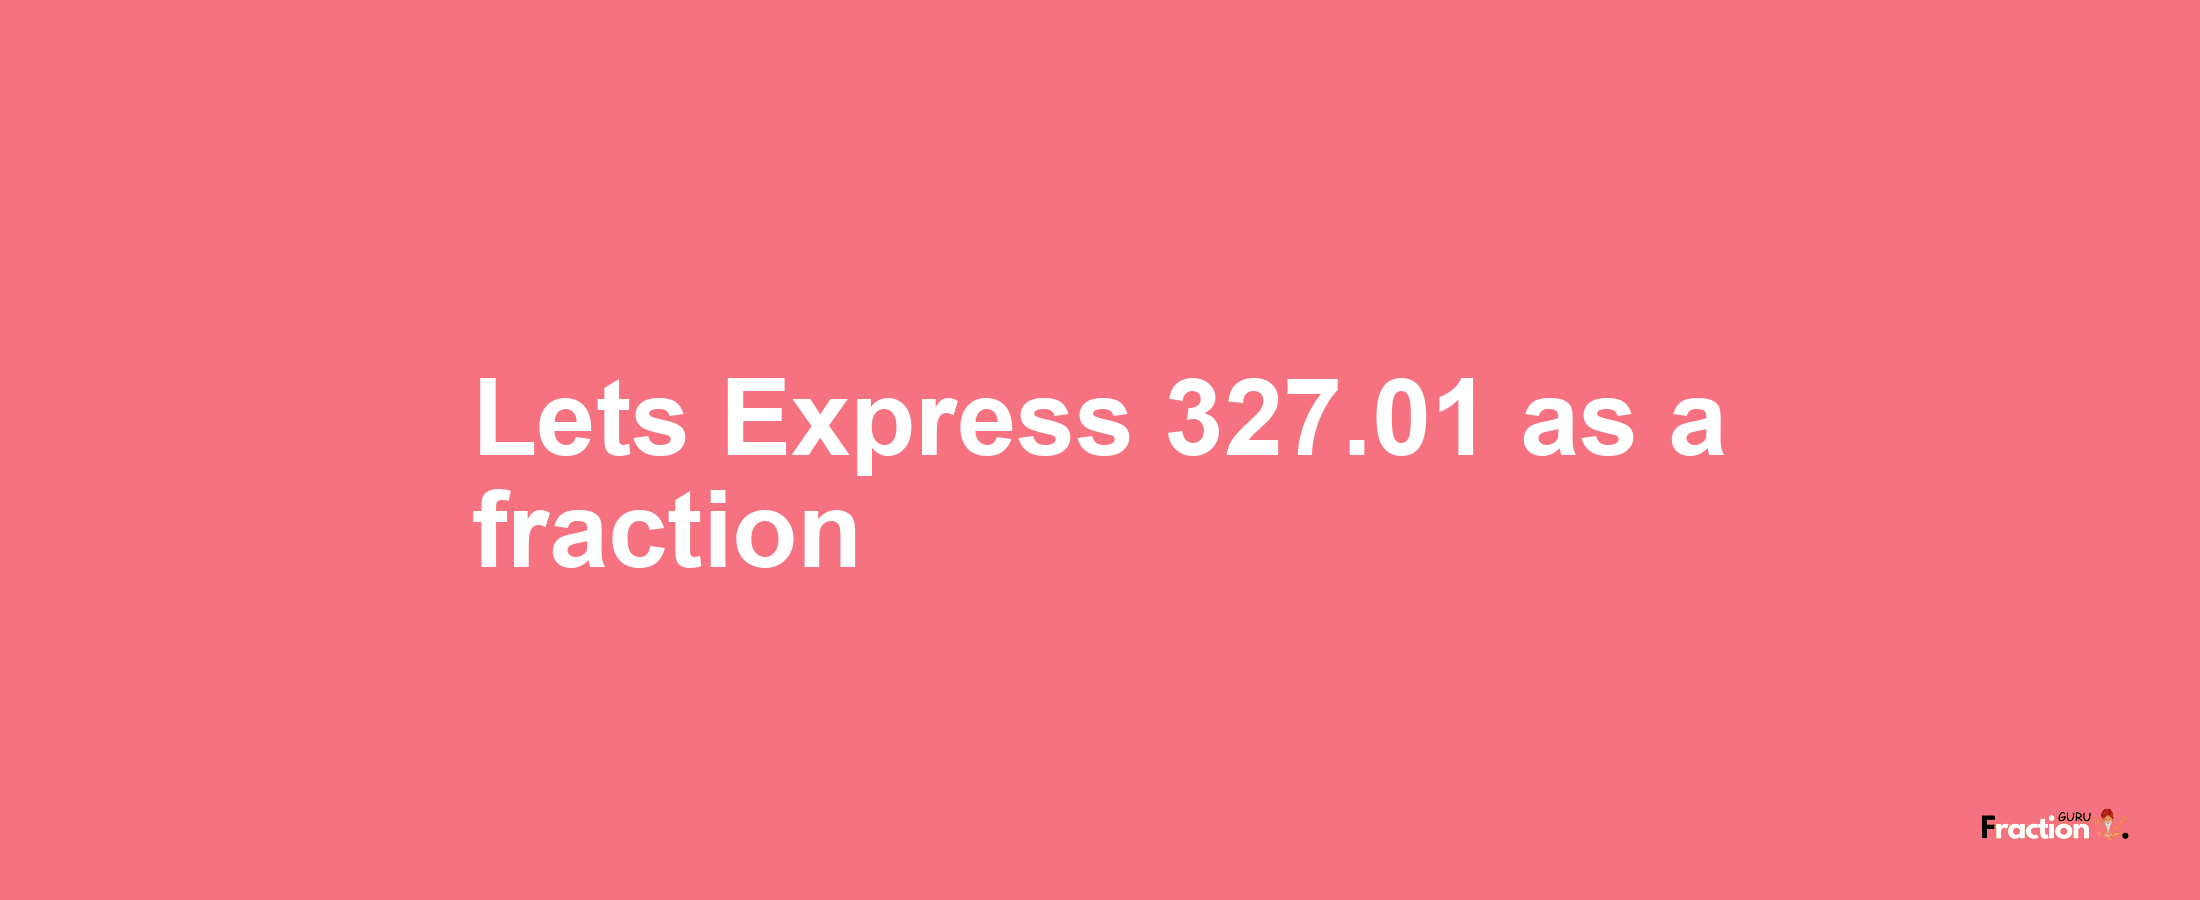 Lets Express 327.01 as afraction